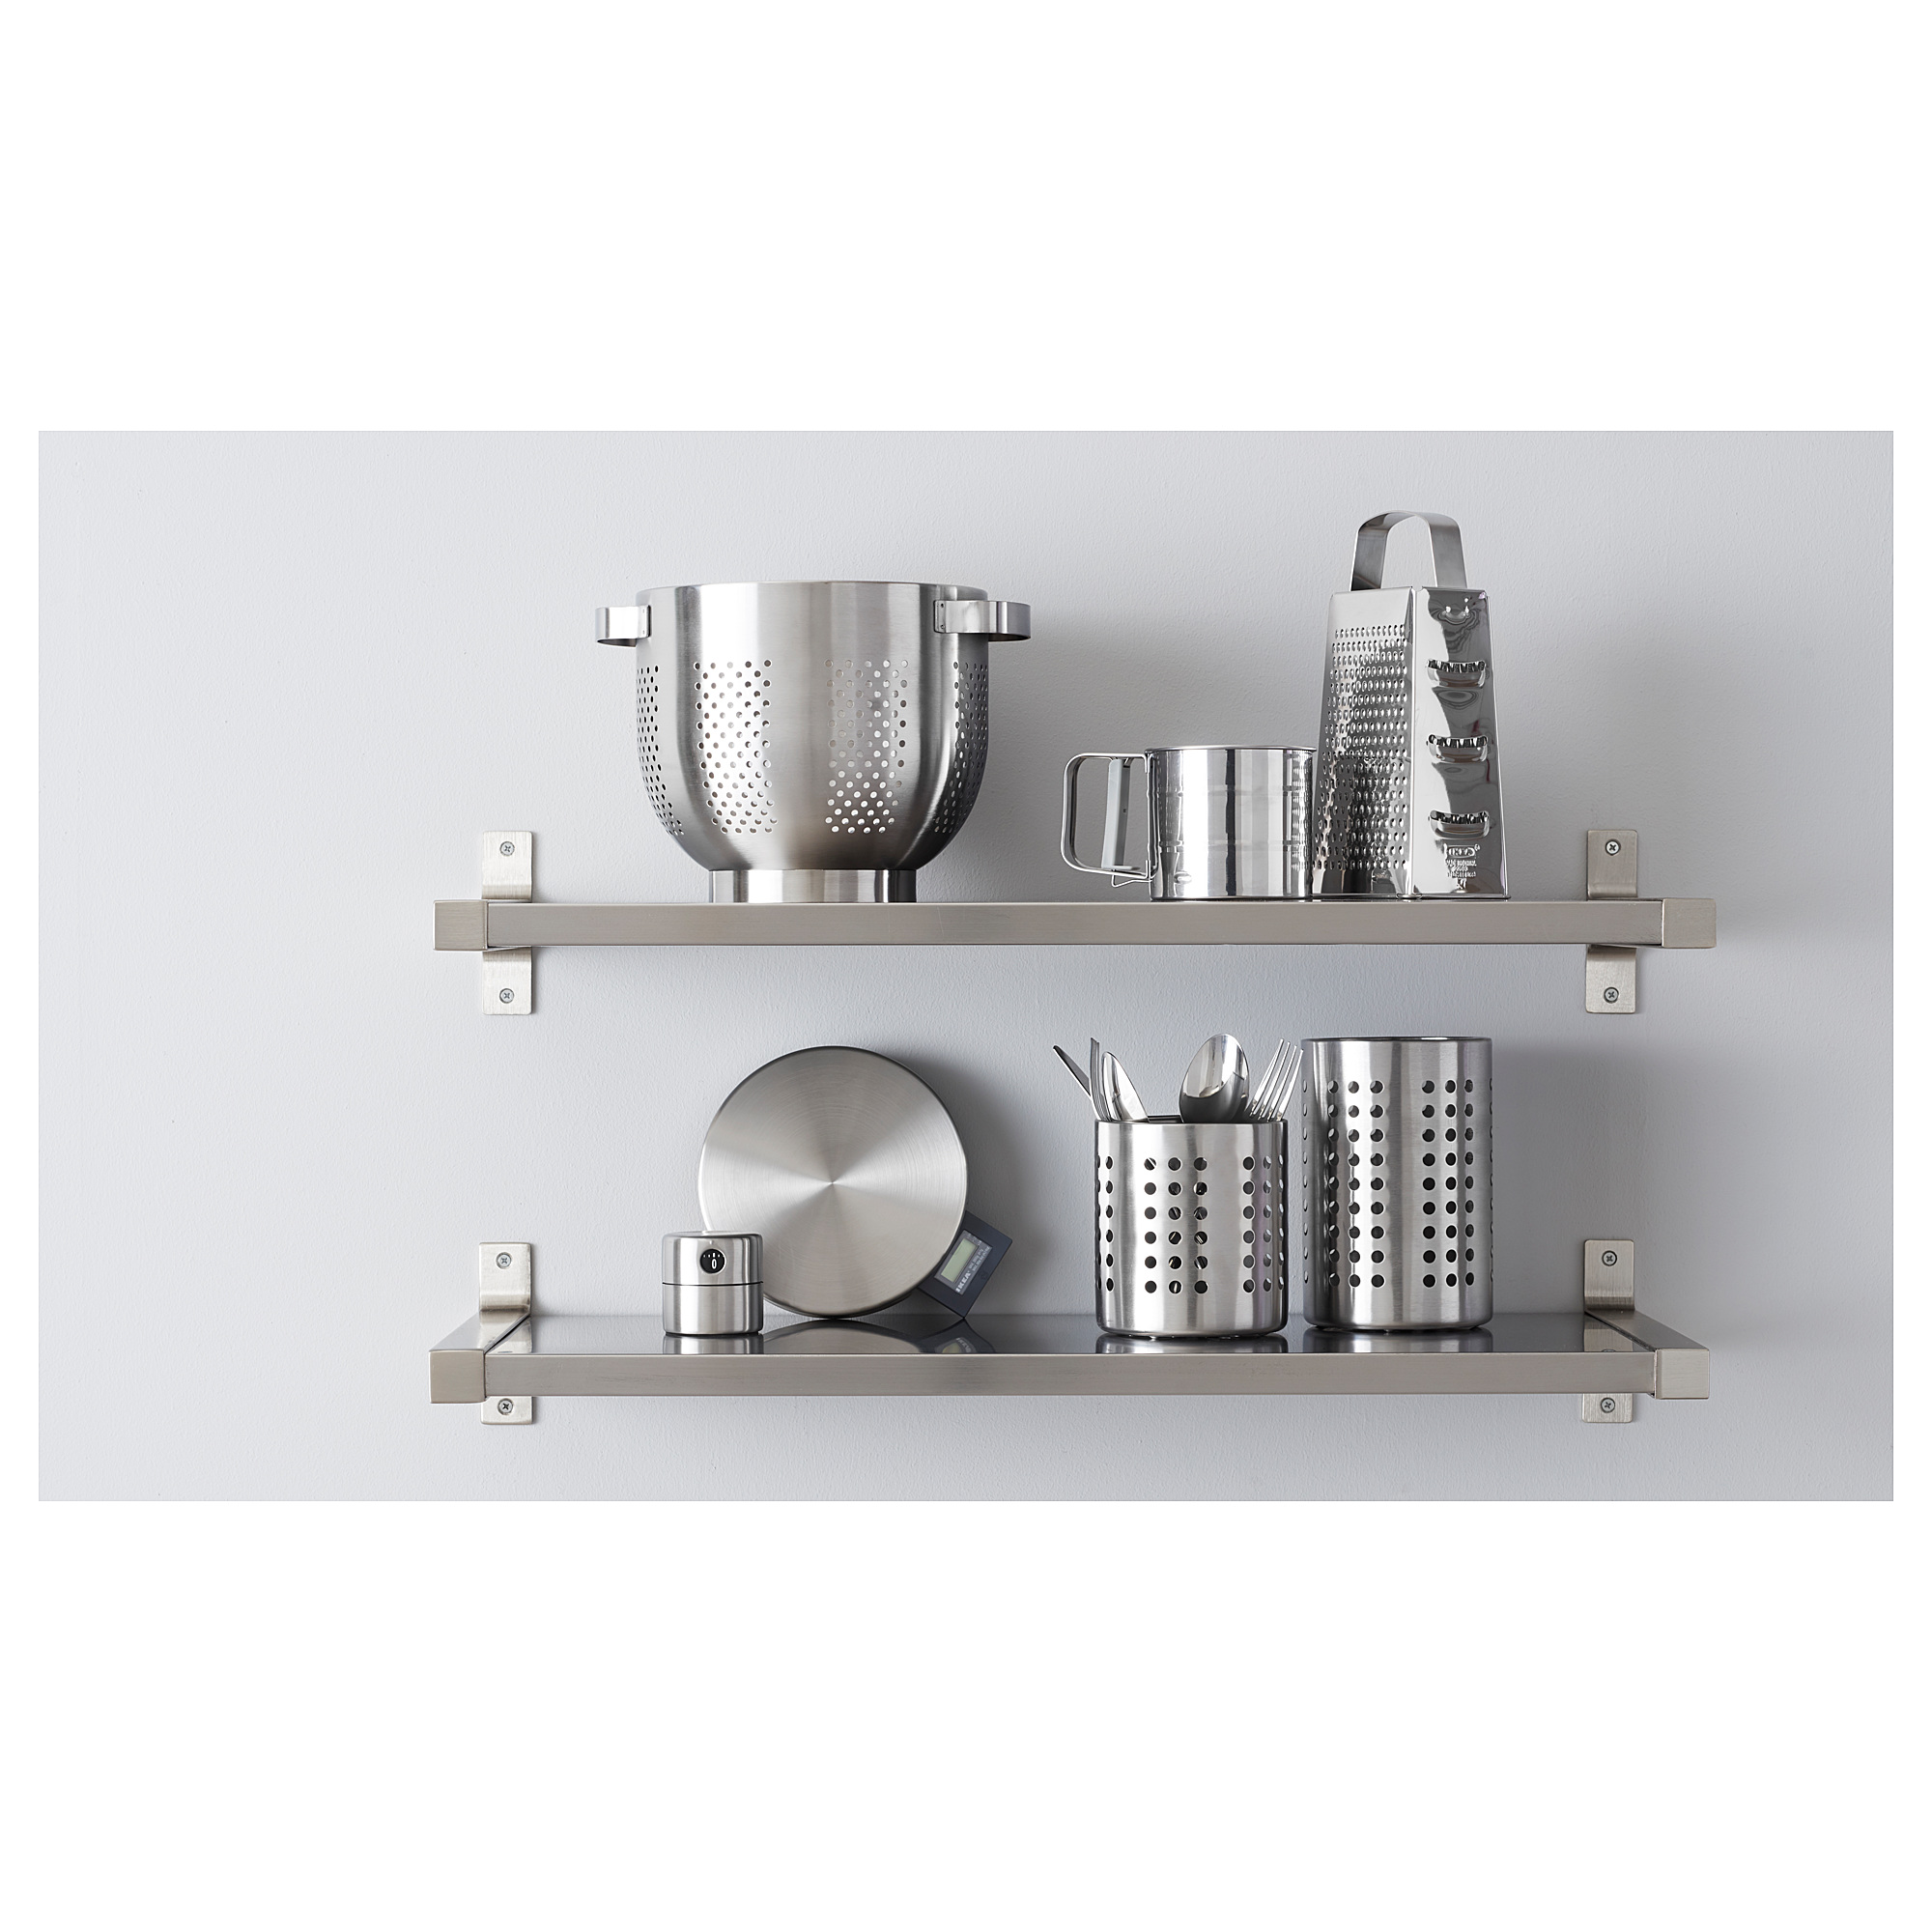 ORDNING cutlery stand